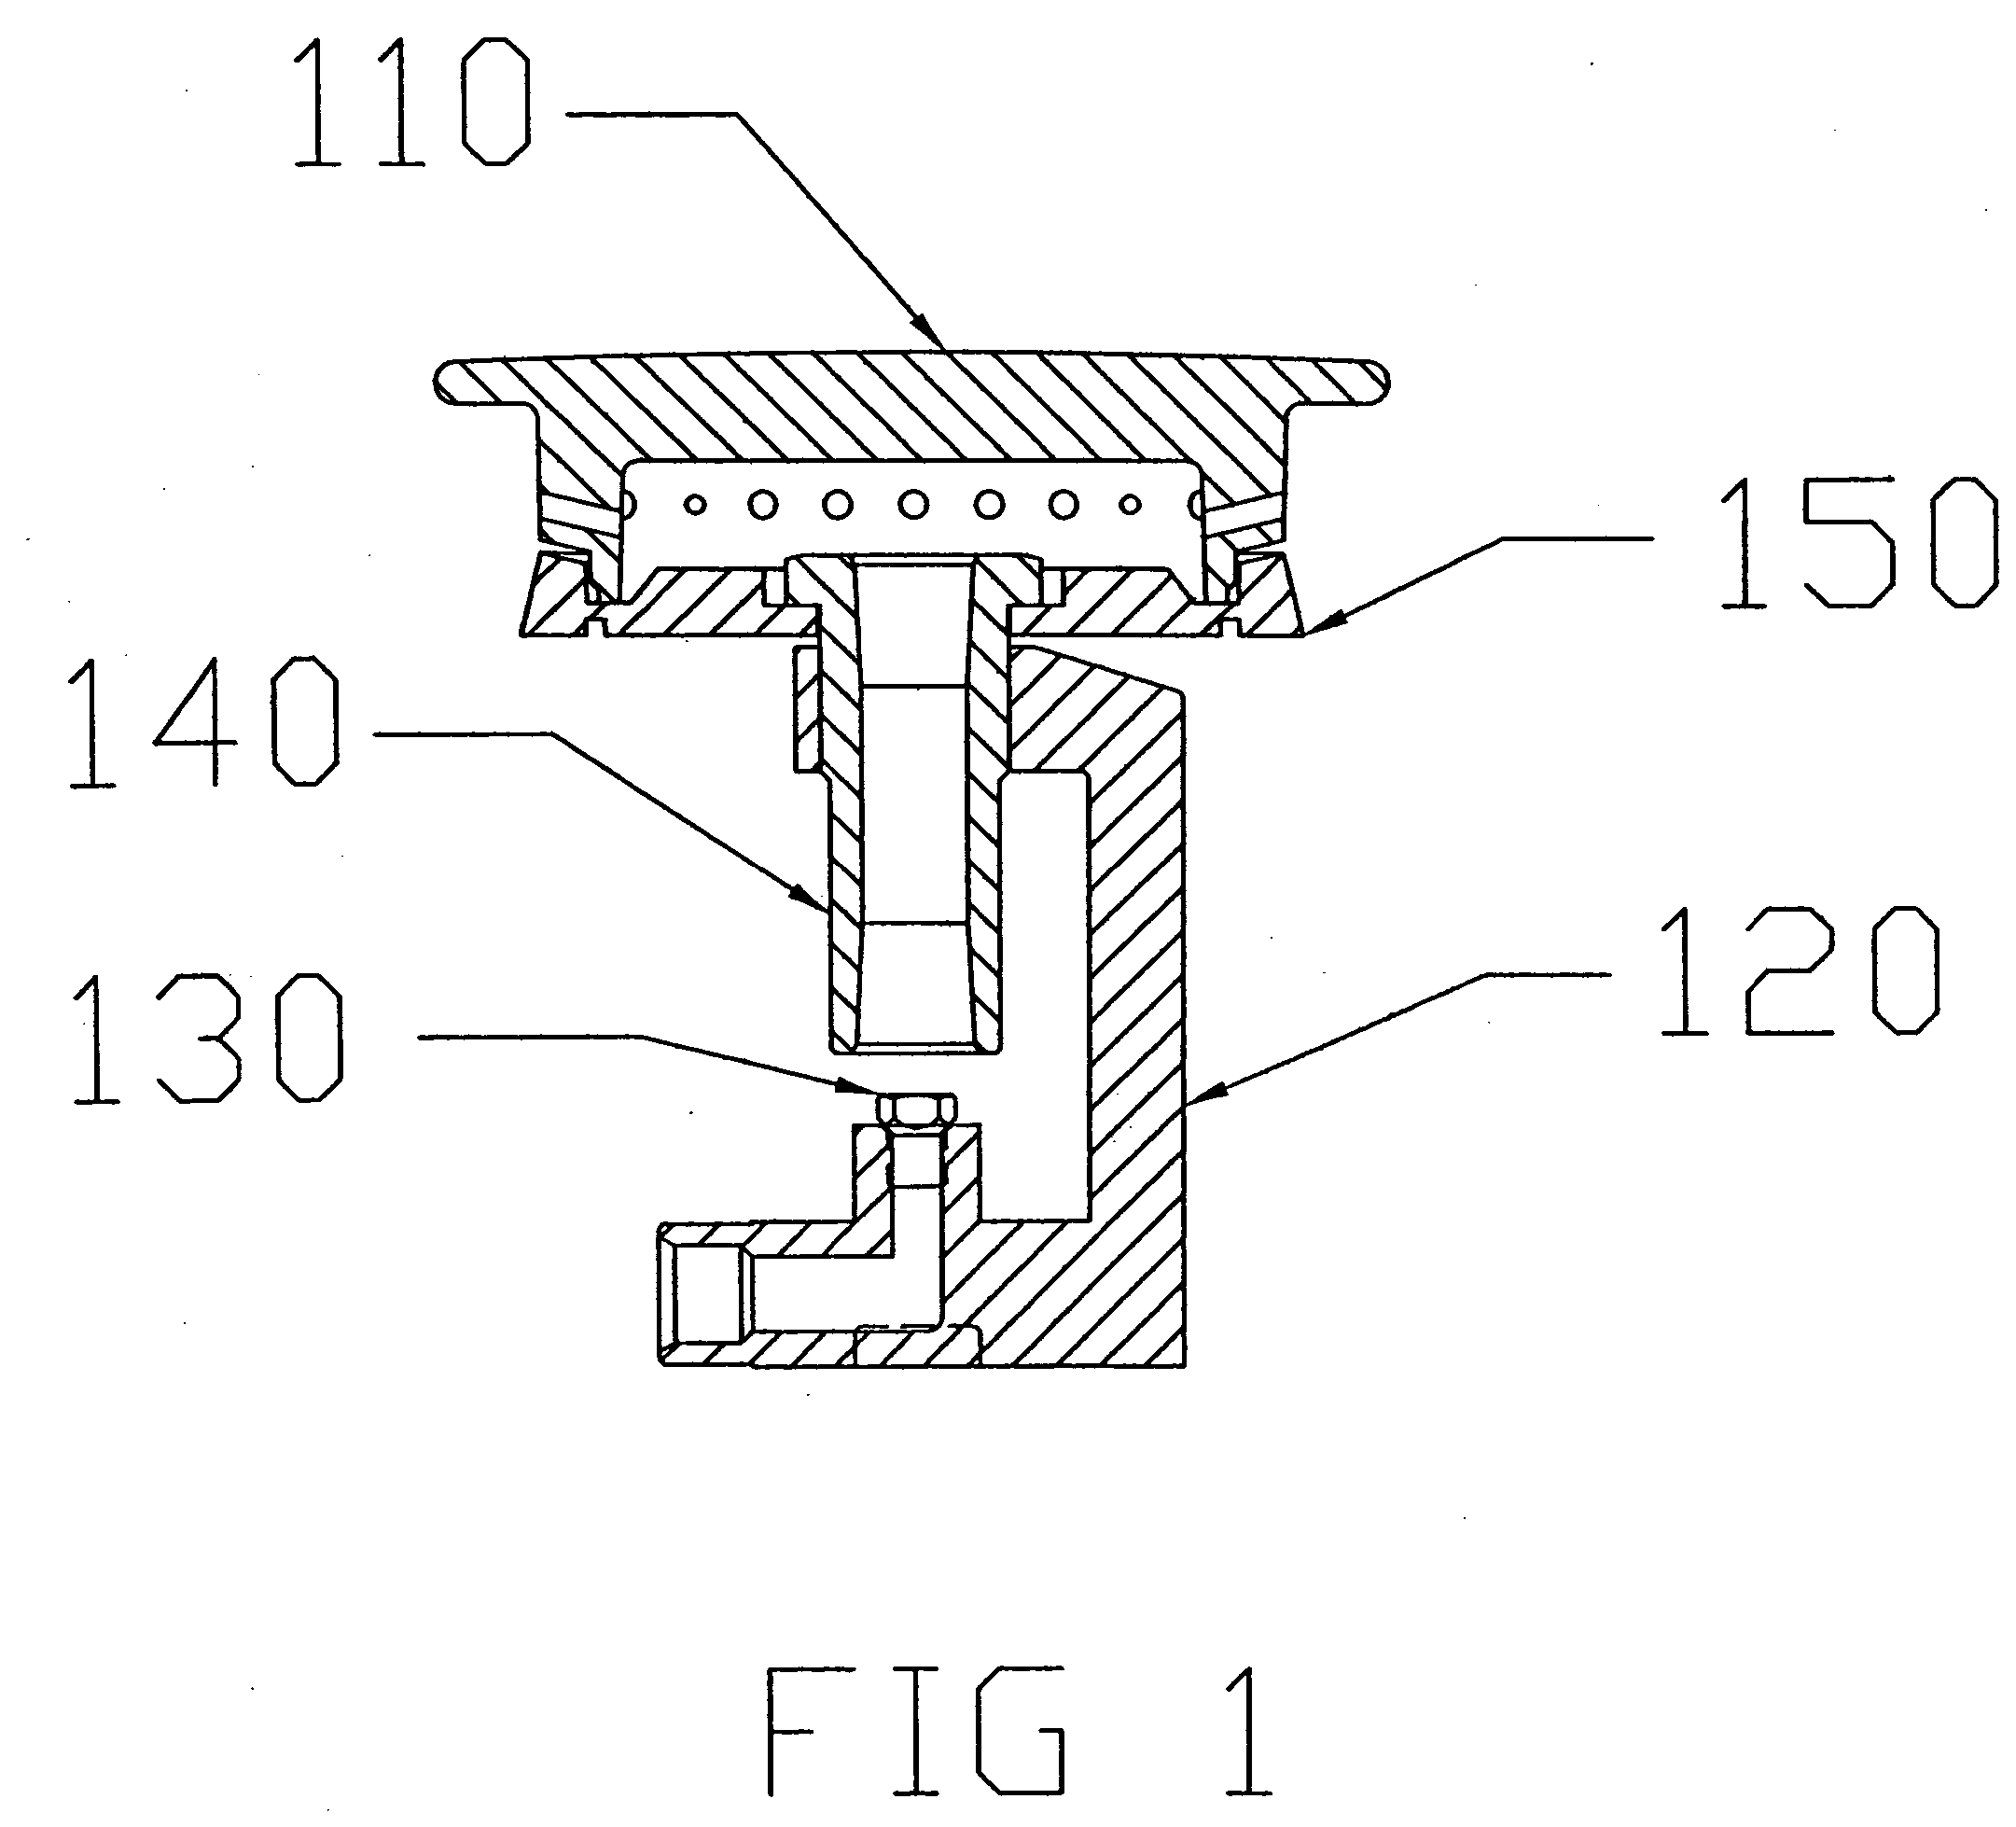 Gas burner head with extra simmer, burner base assembly and combination thereof